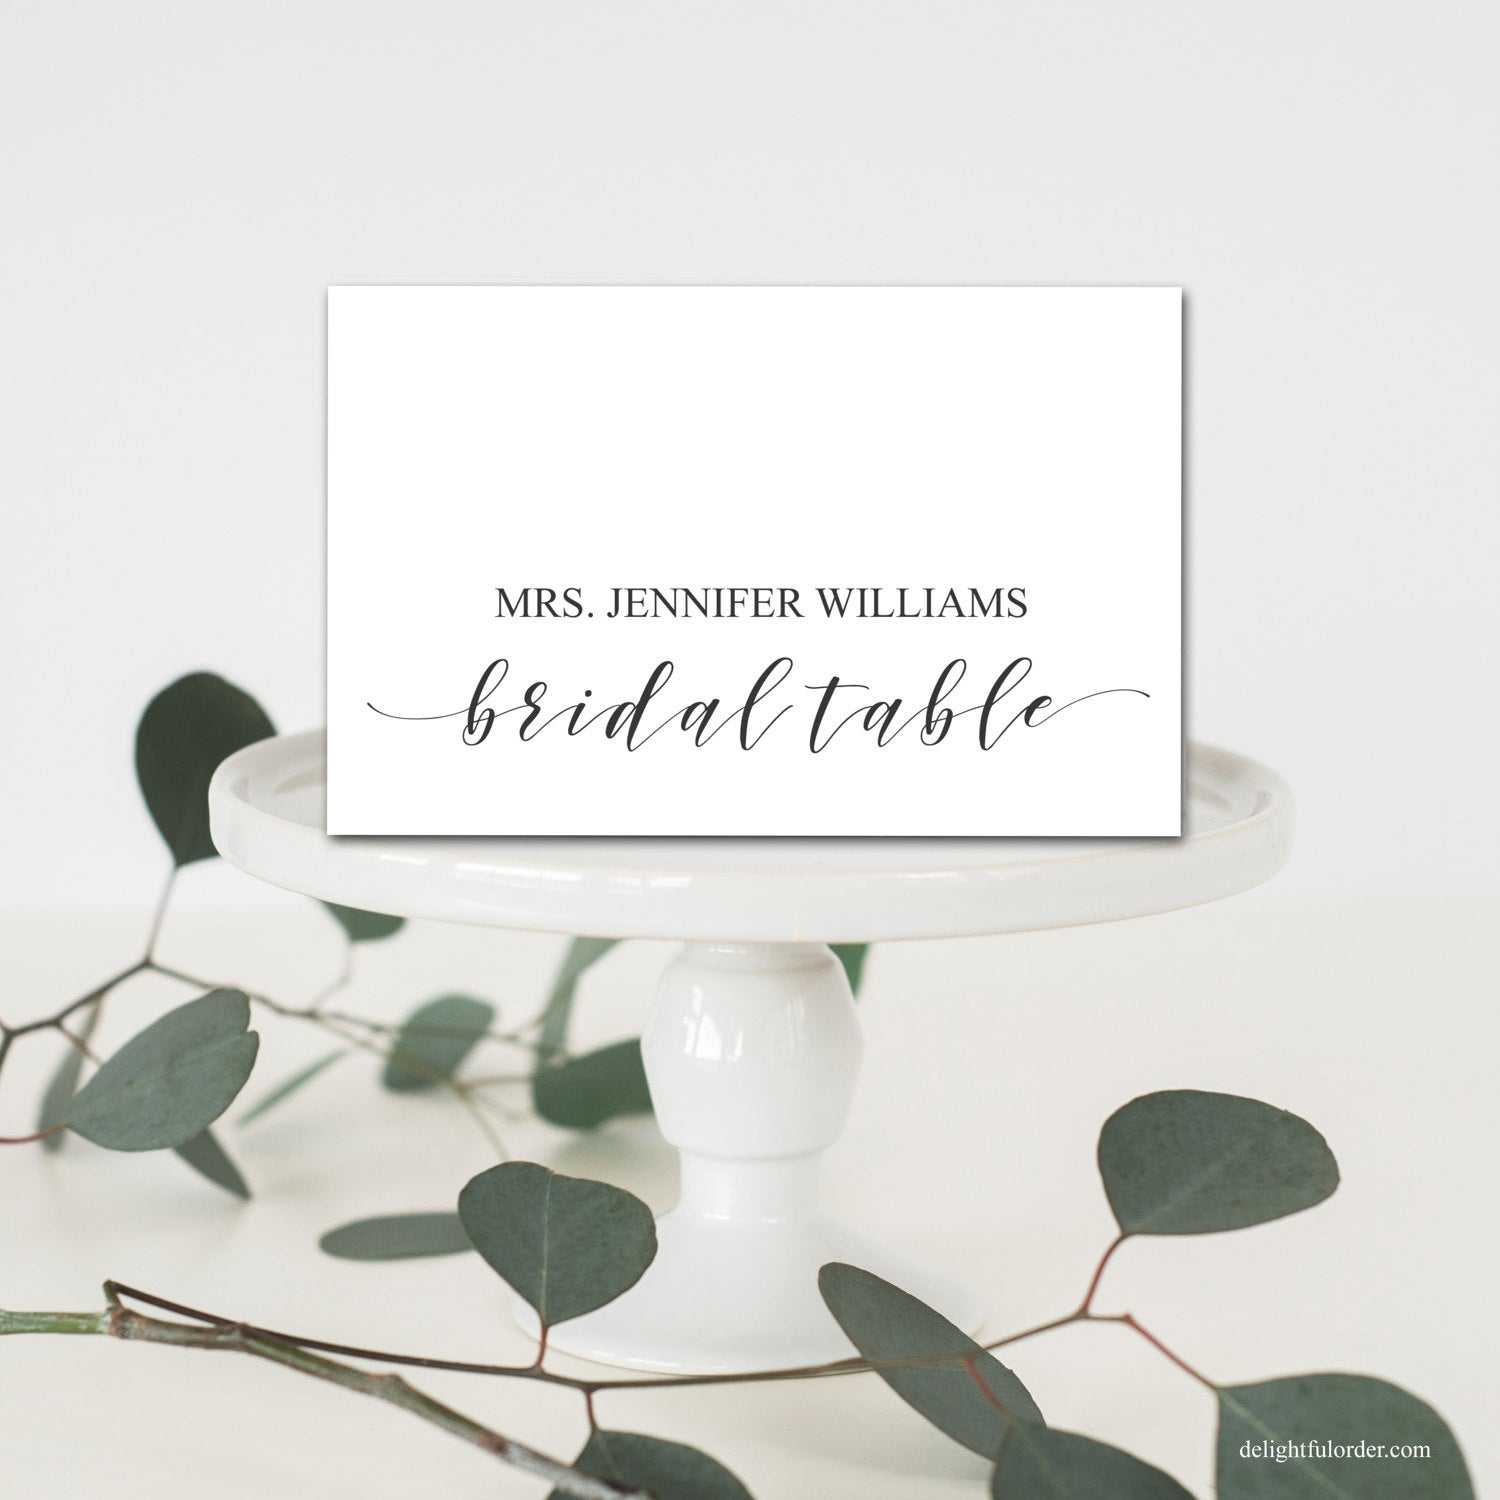 Editable Bridal Table Place Cards, Tent Fold Table Setting Name Cards,  Wedding Table Place Setting, Template, Diy Wedding, Pdf, Printable Throughout Place Card Setting Template